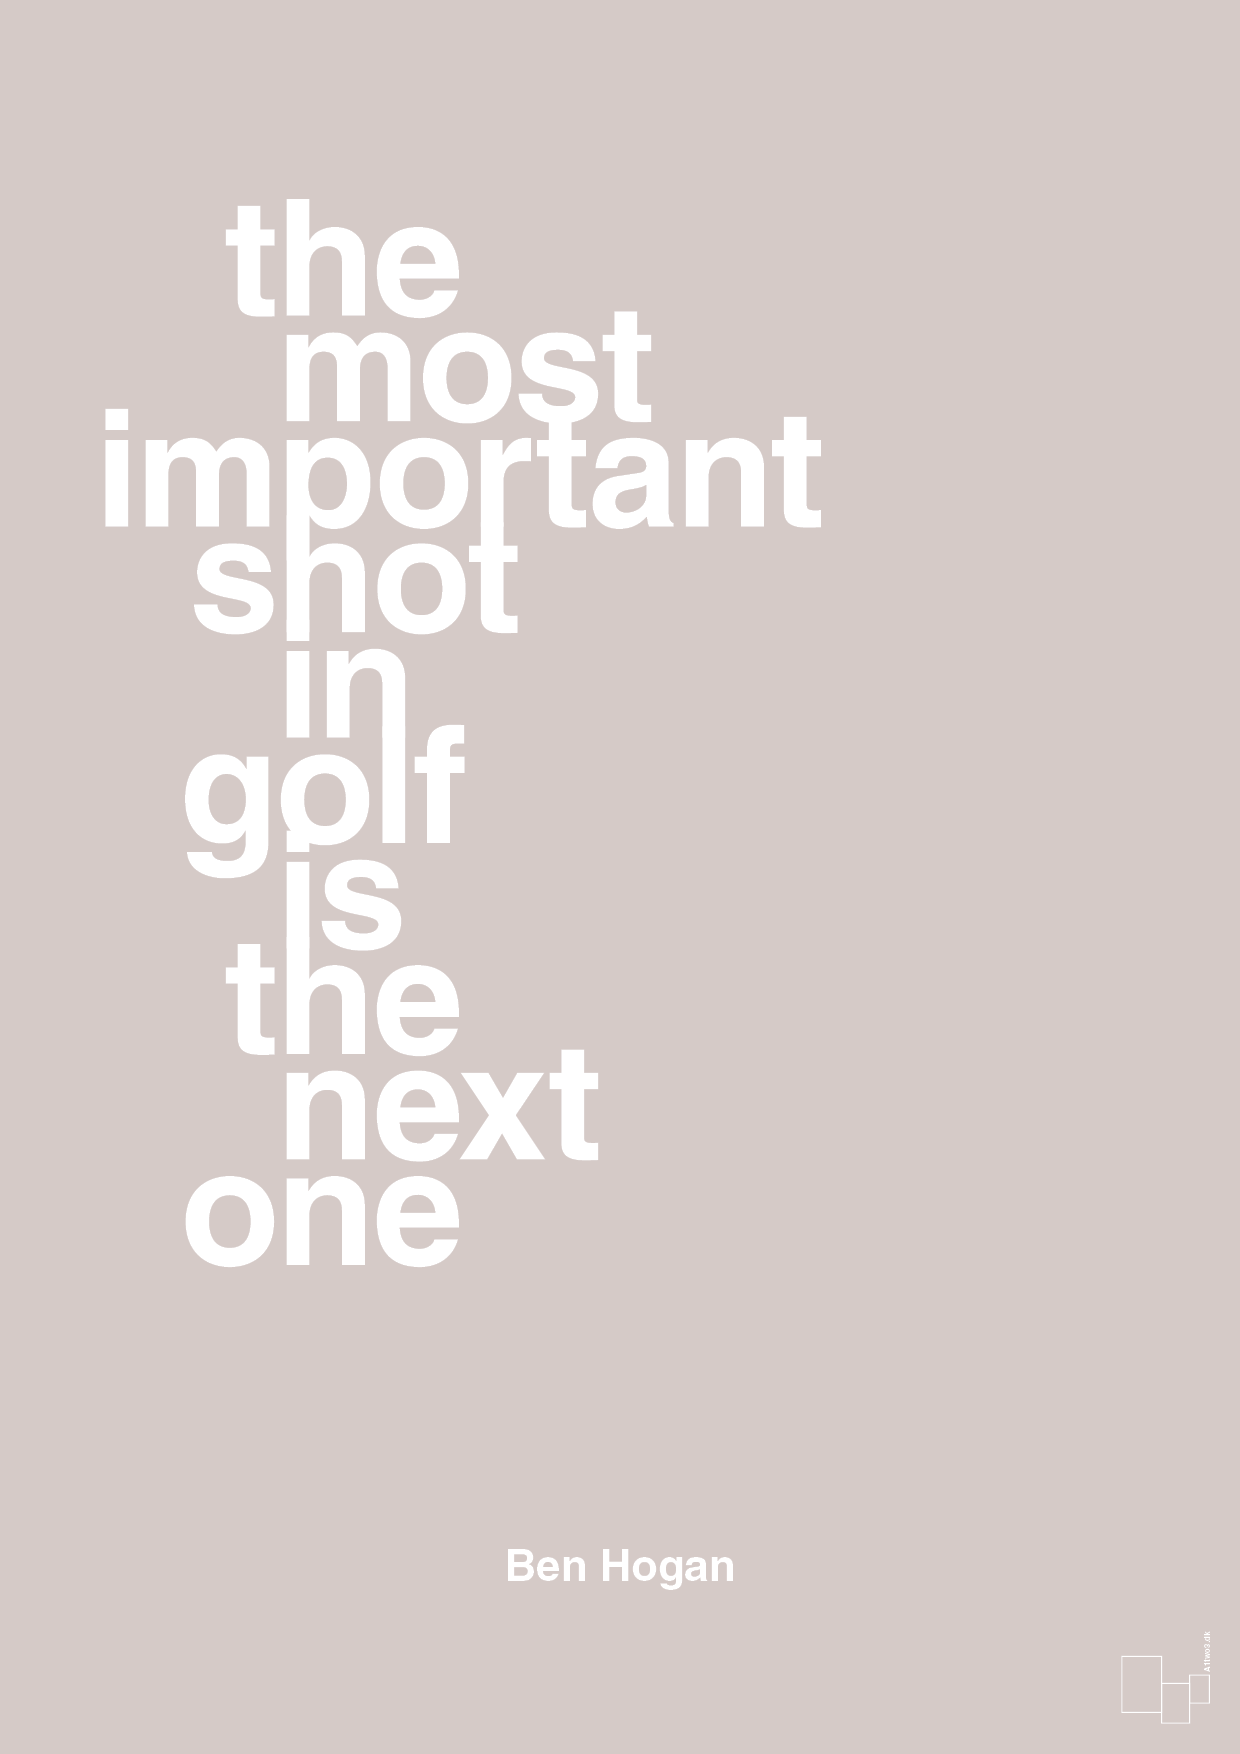 the most important shot in golf is the next one - Plakat med Citater i Broken Beige